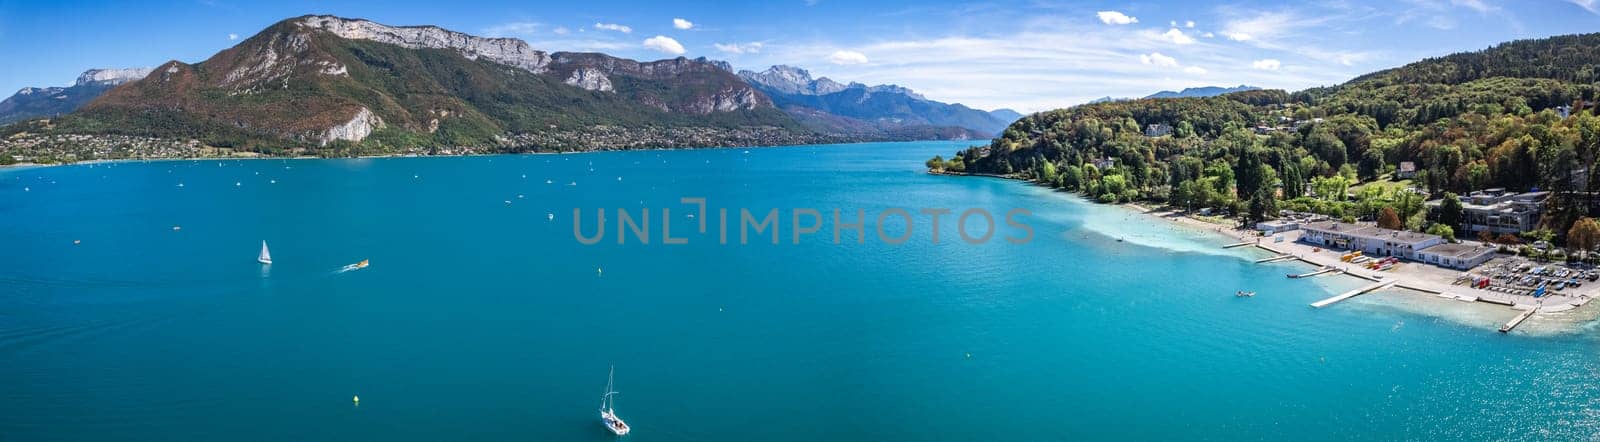 Aerial view of Annecy city Centre, plage des marquisats or marquisats beach, in Haute Savoie, France, Europe